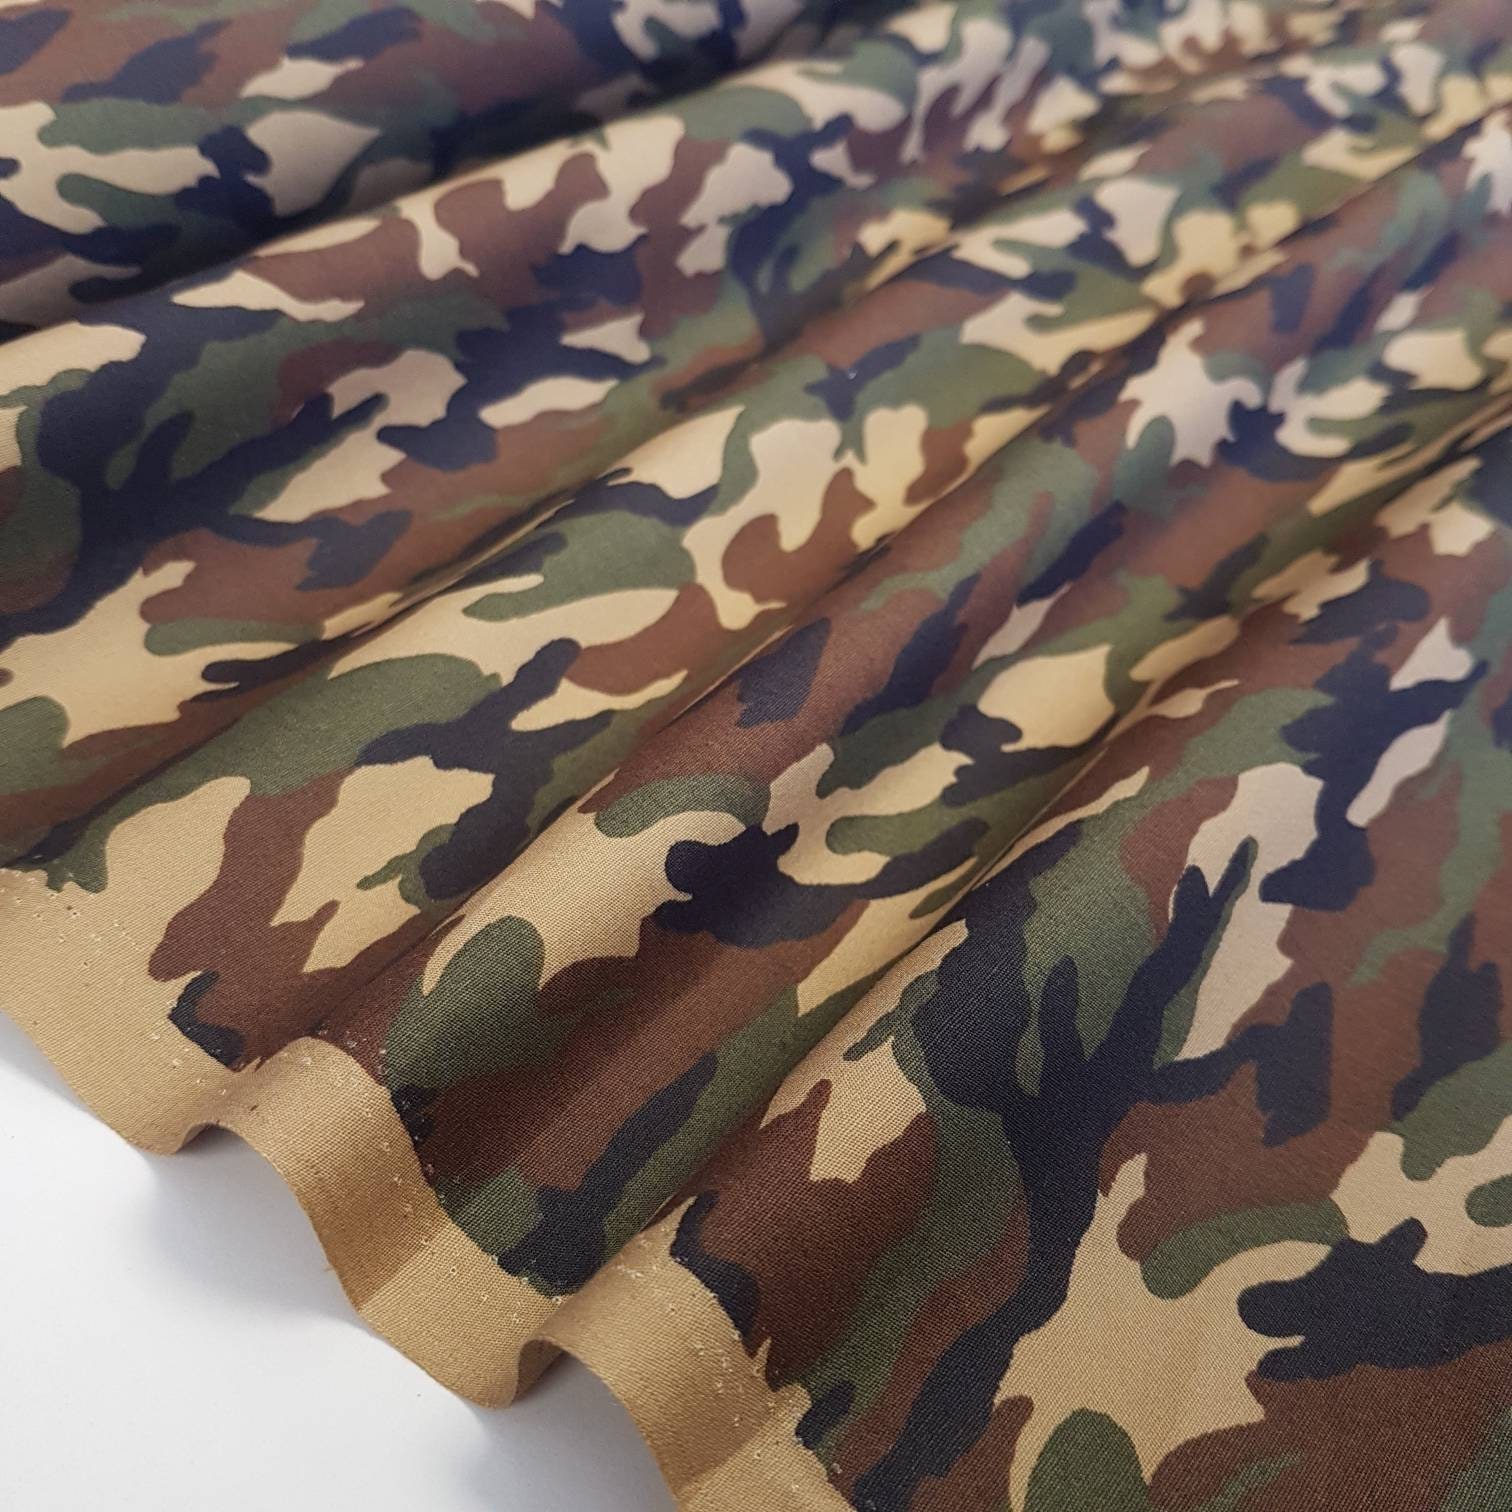 Camouflage tissu 100% coton drill army camo vêtements militaires robe ameublement